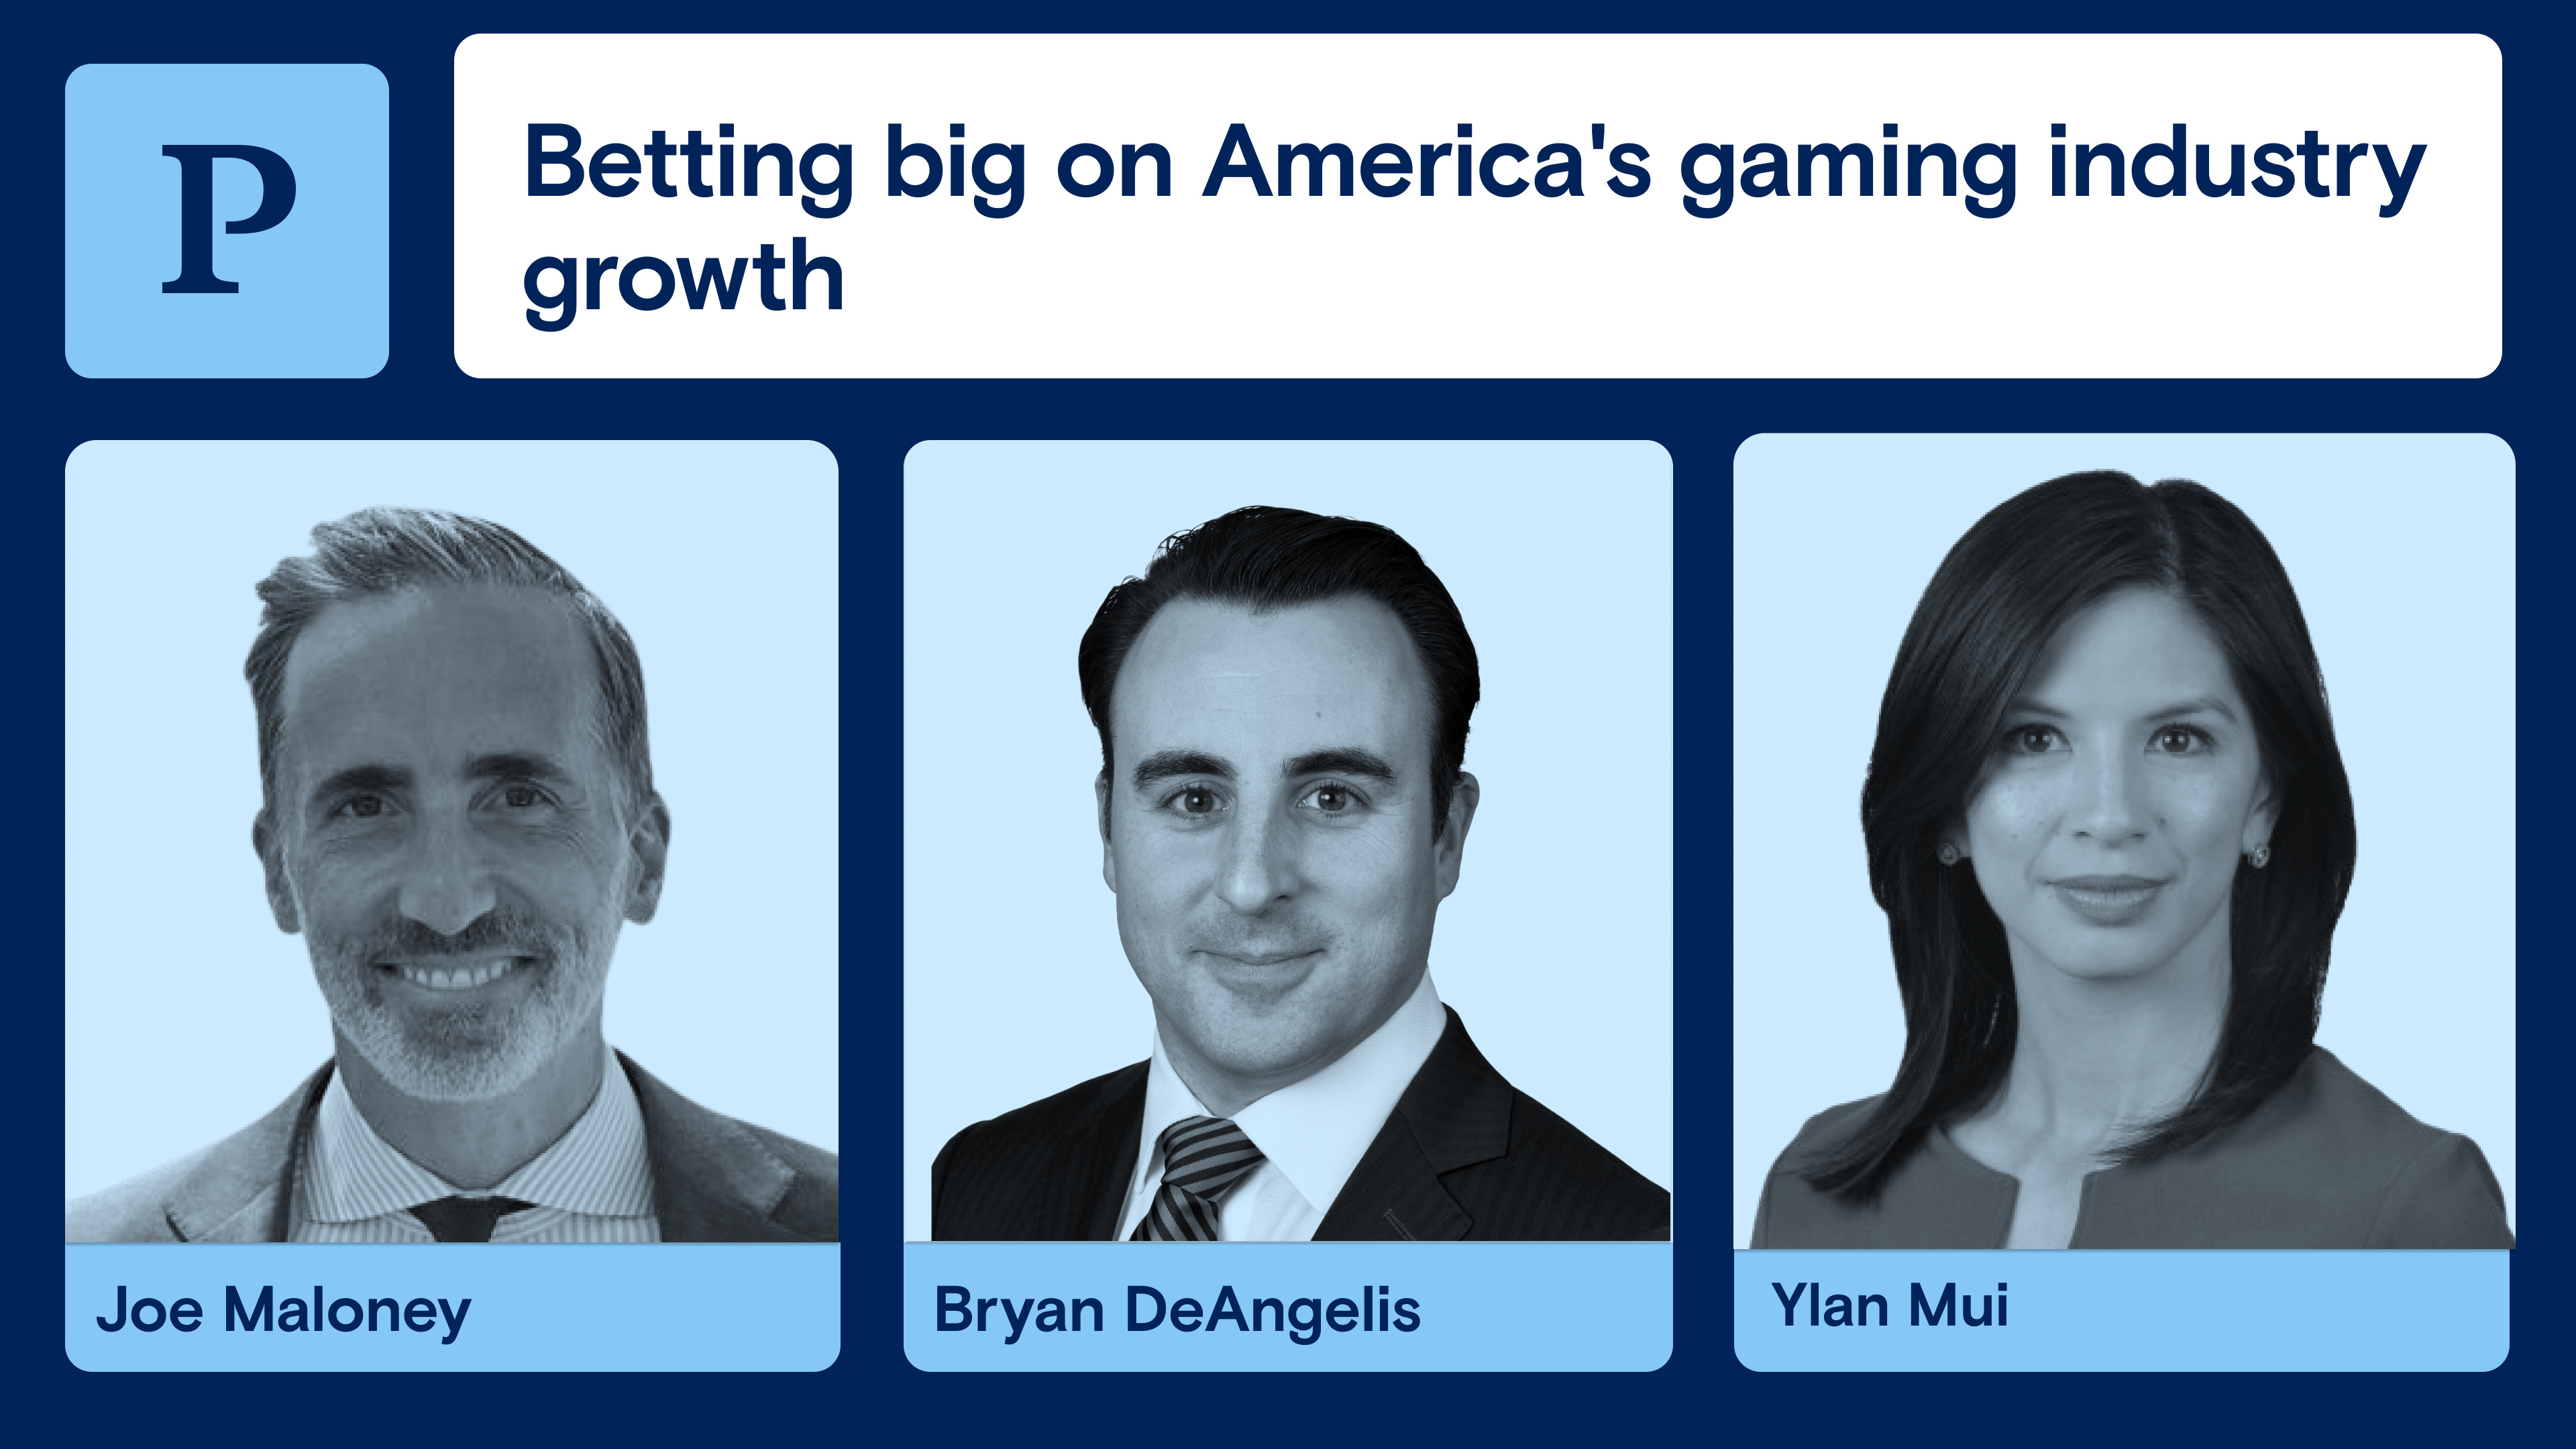 Betting big on America's gaming industry growth